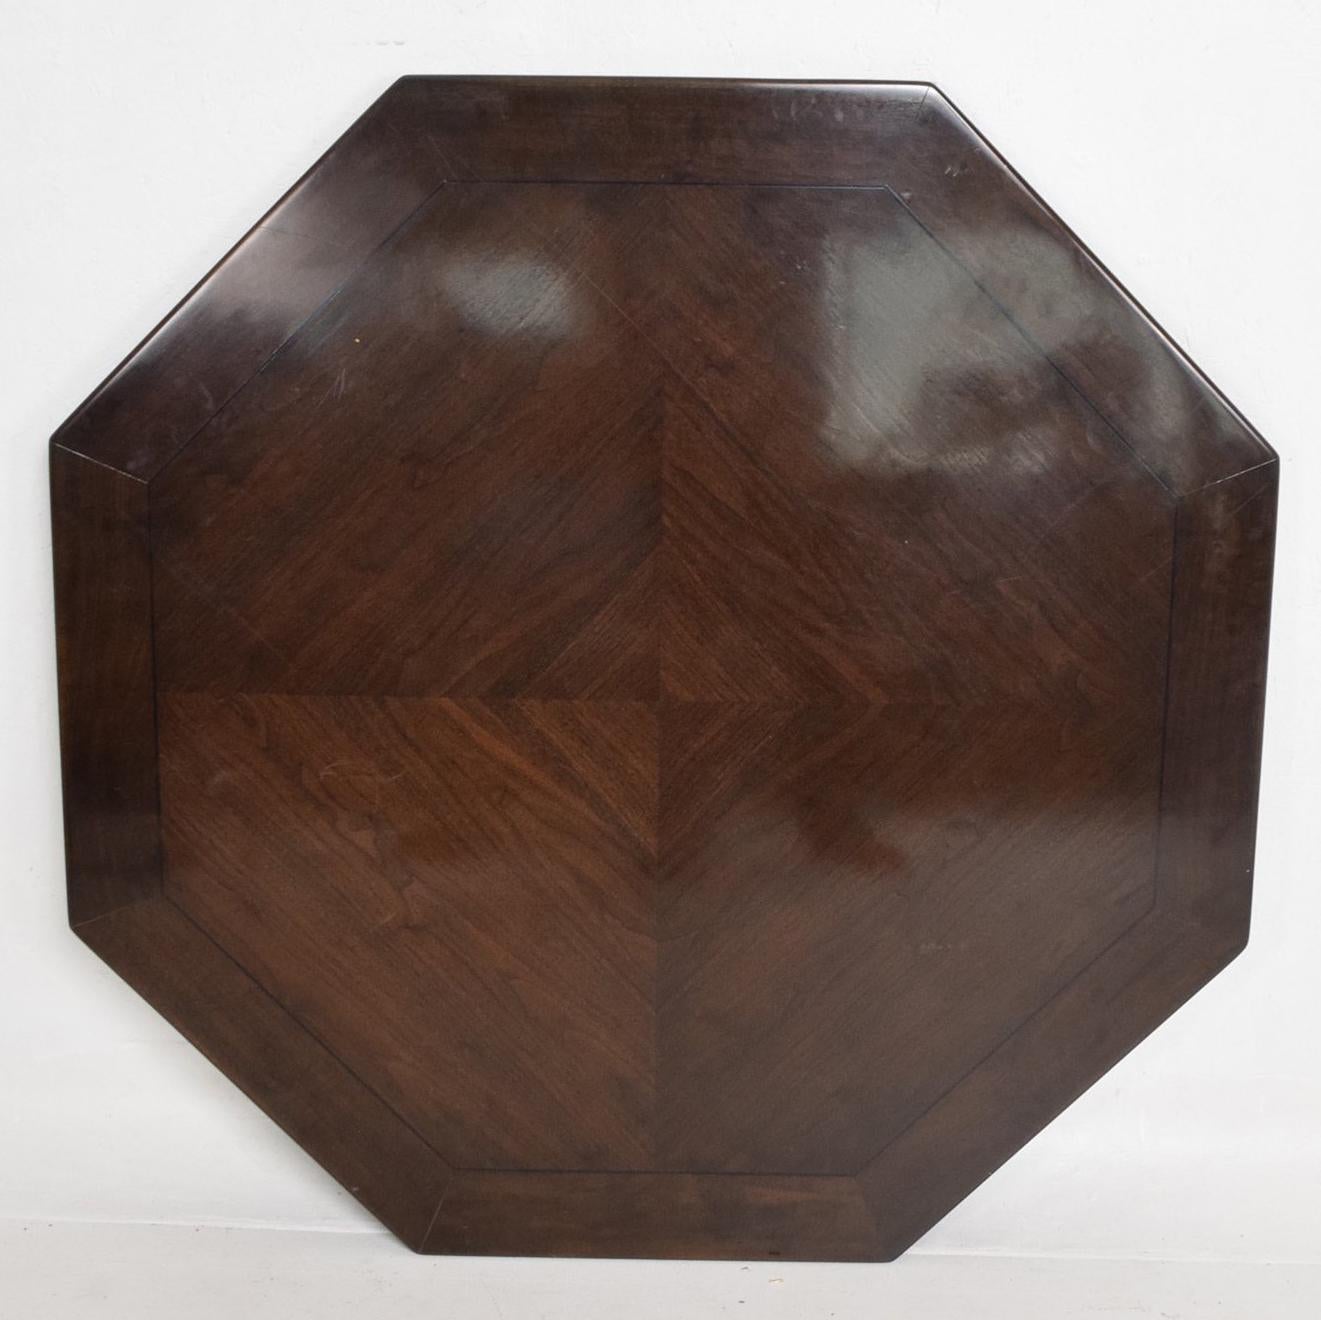 For your consideration a beautiful walnut dining table attributed to Monteverdi & Young. No label present. Great quality. Legs and edges are solid wood. Center top appears to be walnut veneer in plywood. 

Sculptural shape with great unique